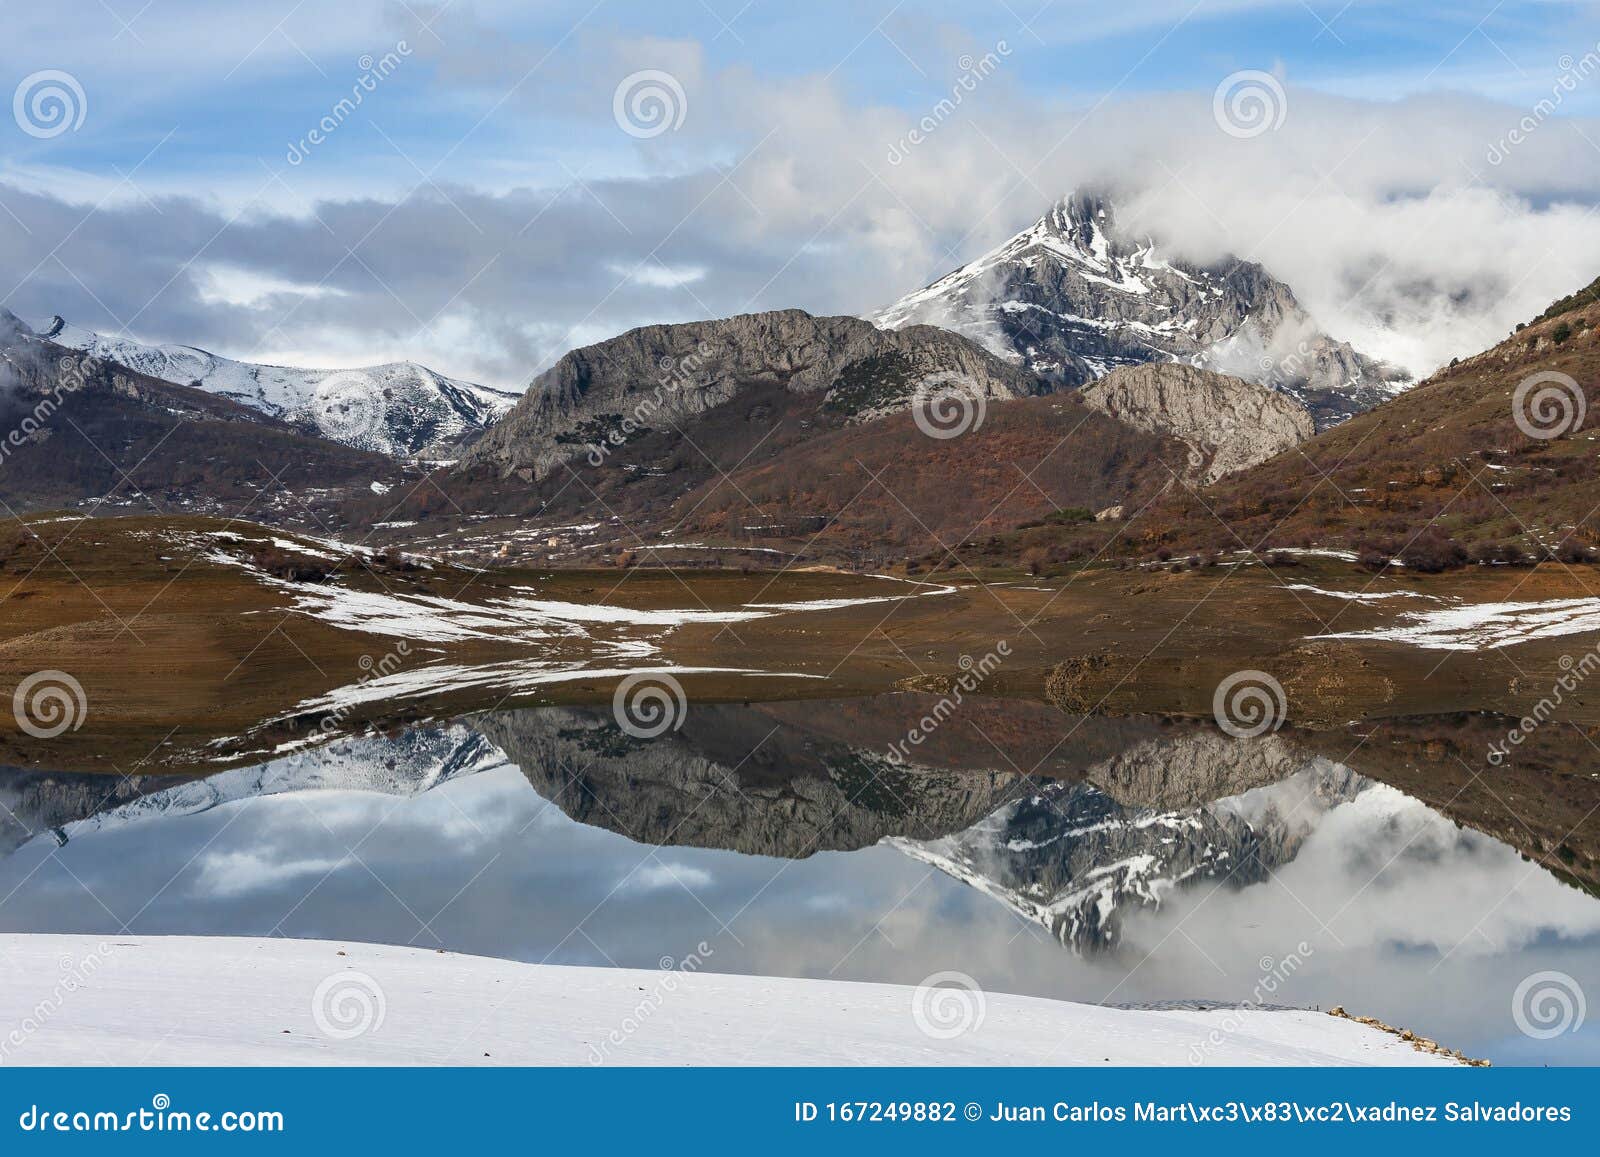 porma reservoir, susaron peak snowy and its reflection in the water. lion. spain